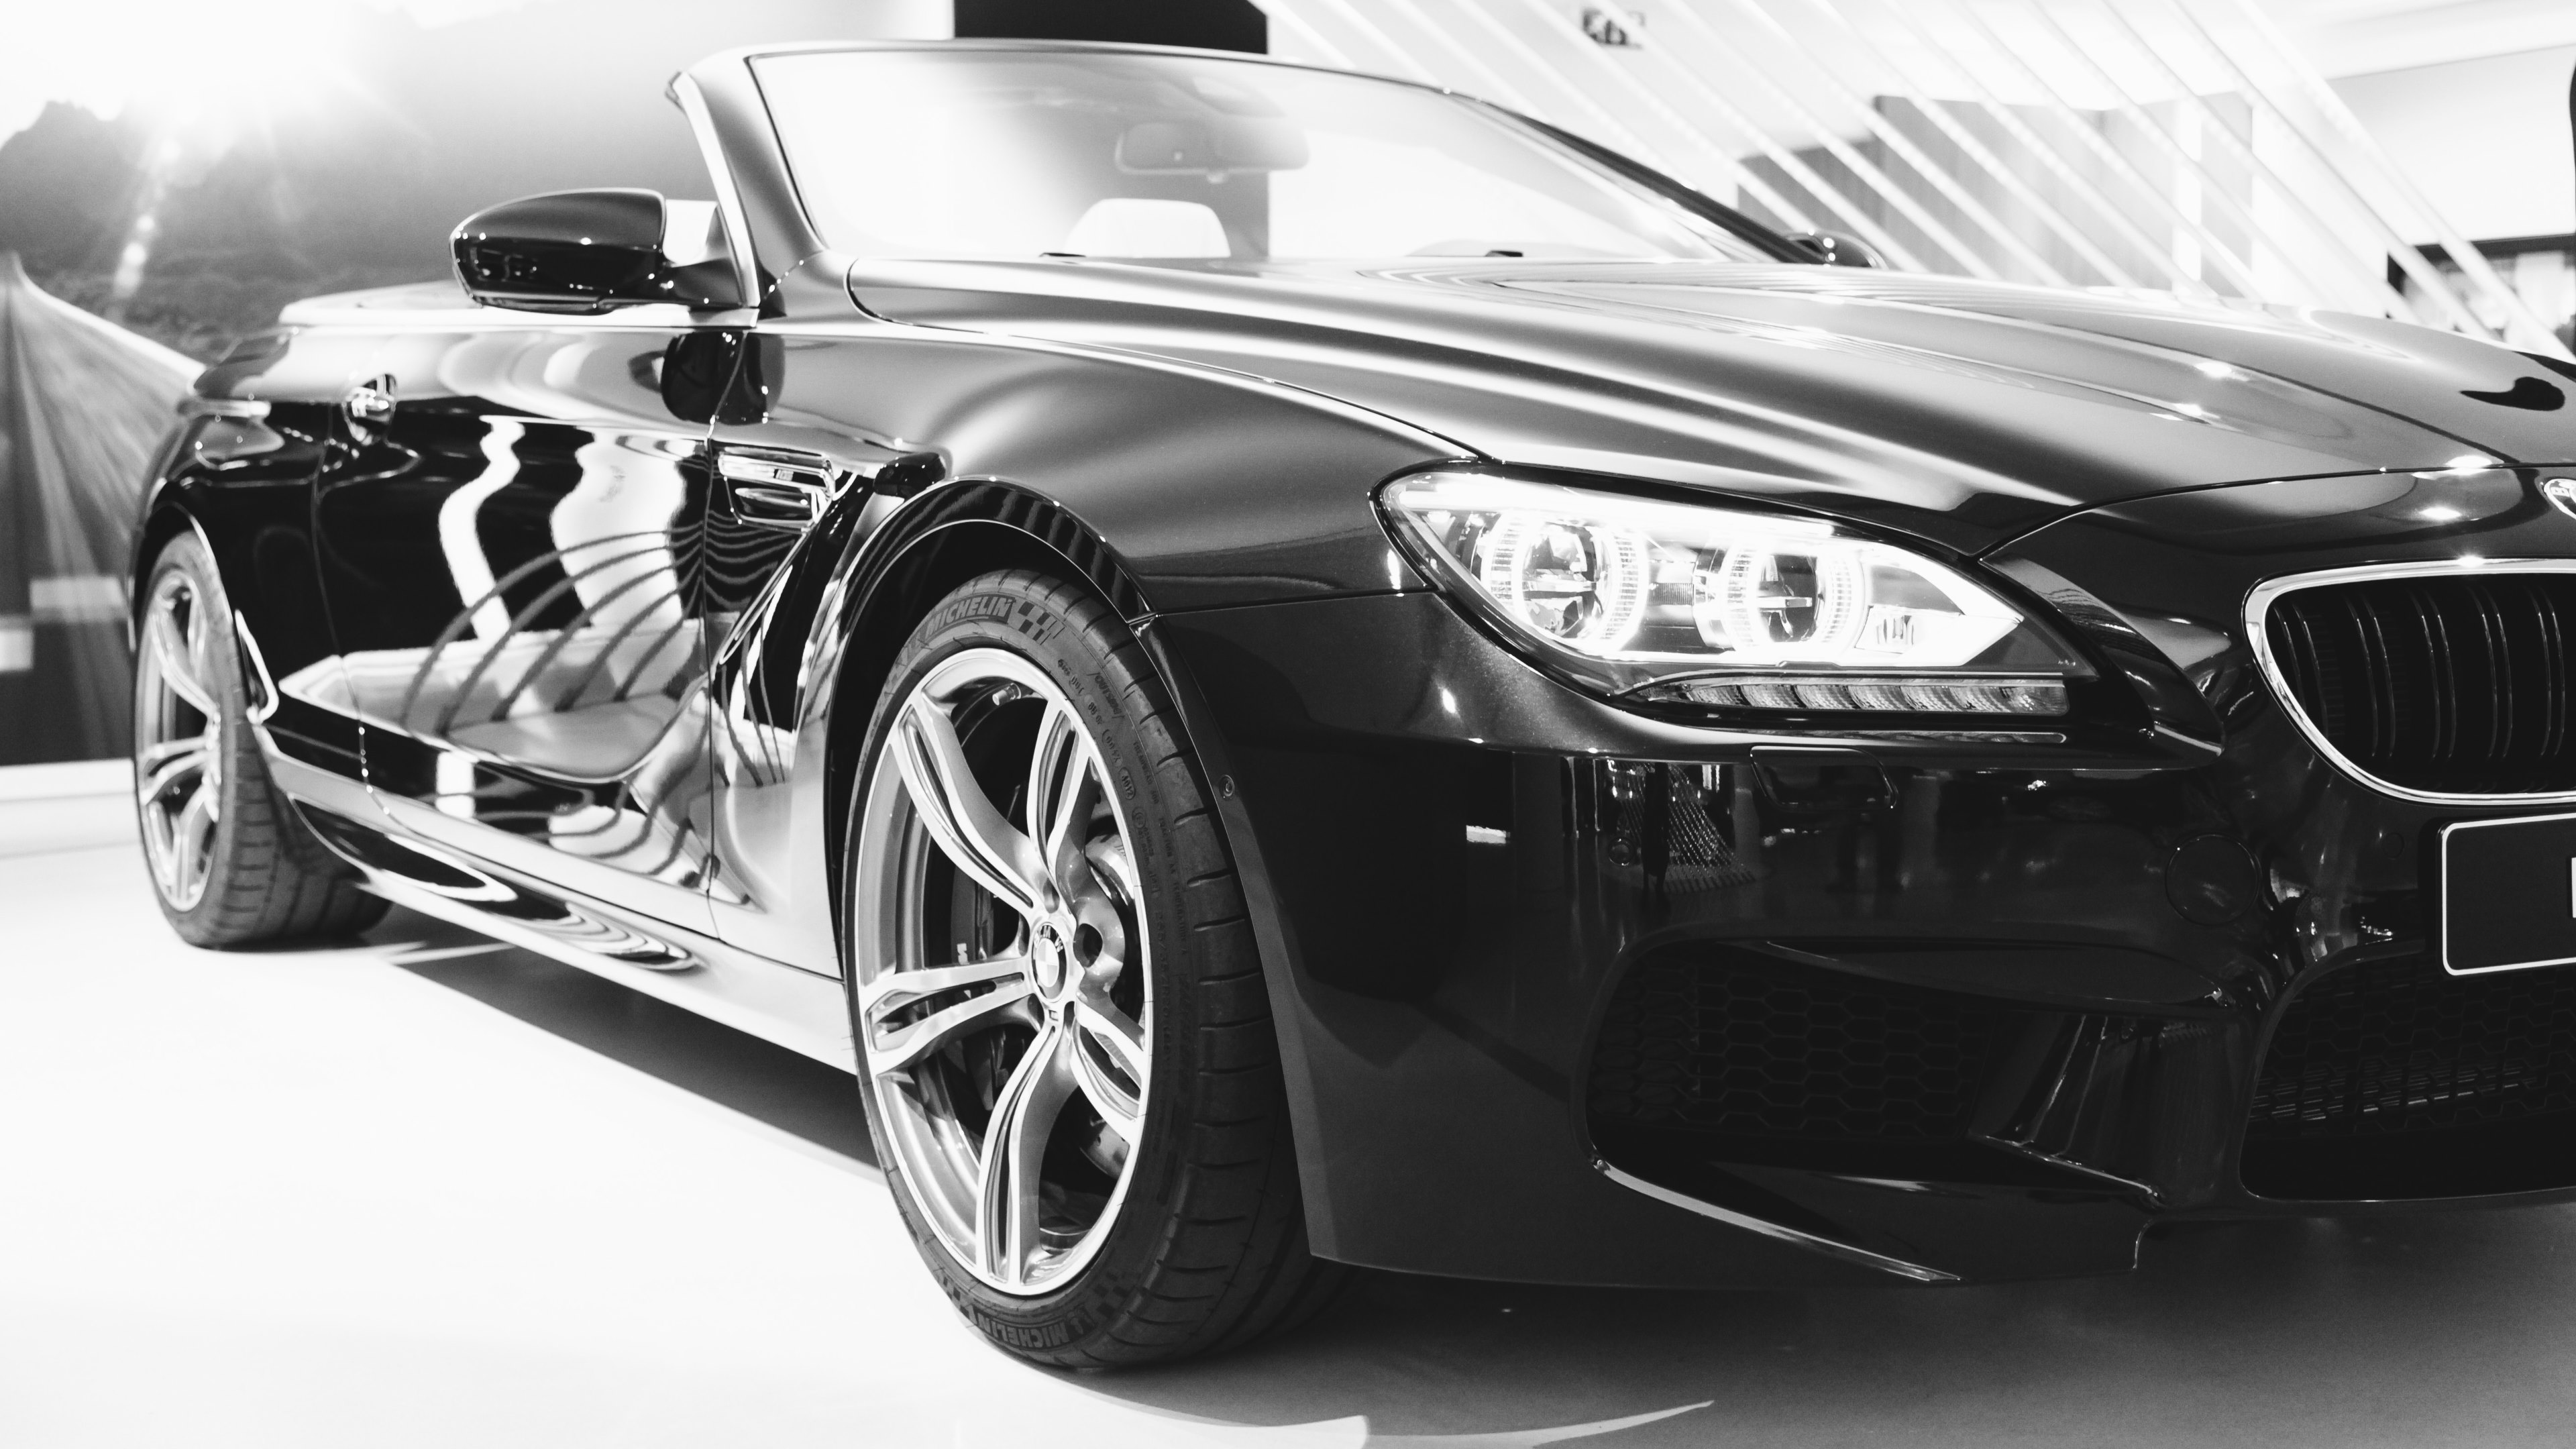 BMW Convertible by Anthony Delanoix 4k Ultra HD Wallpaper